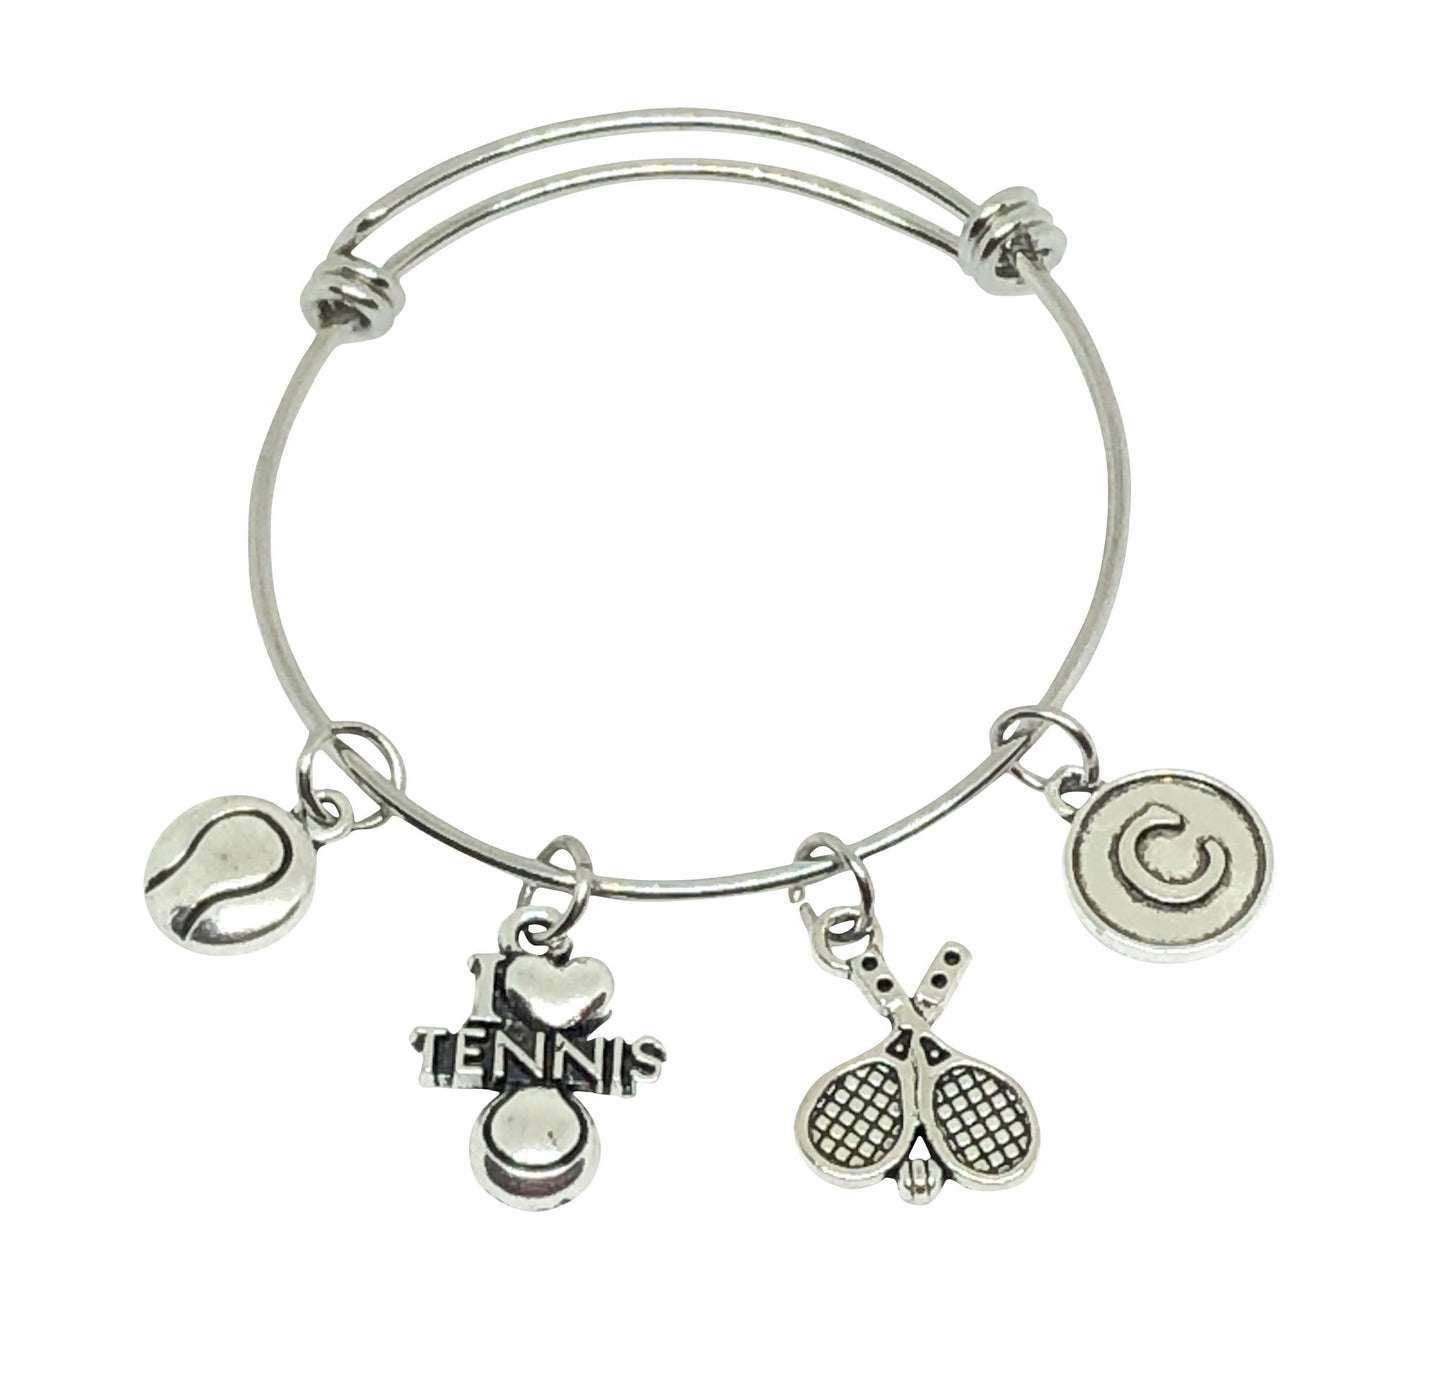 Tennis Personalized Charm Bracelet - Cheer and Dance On Demand